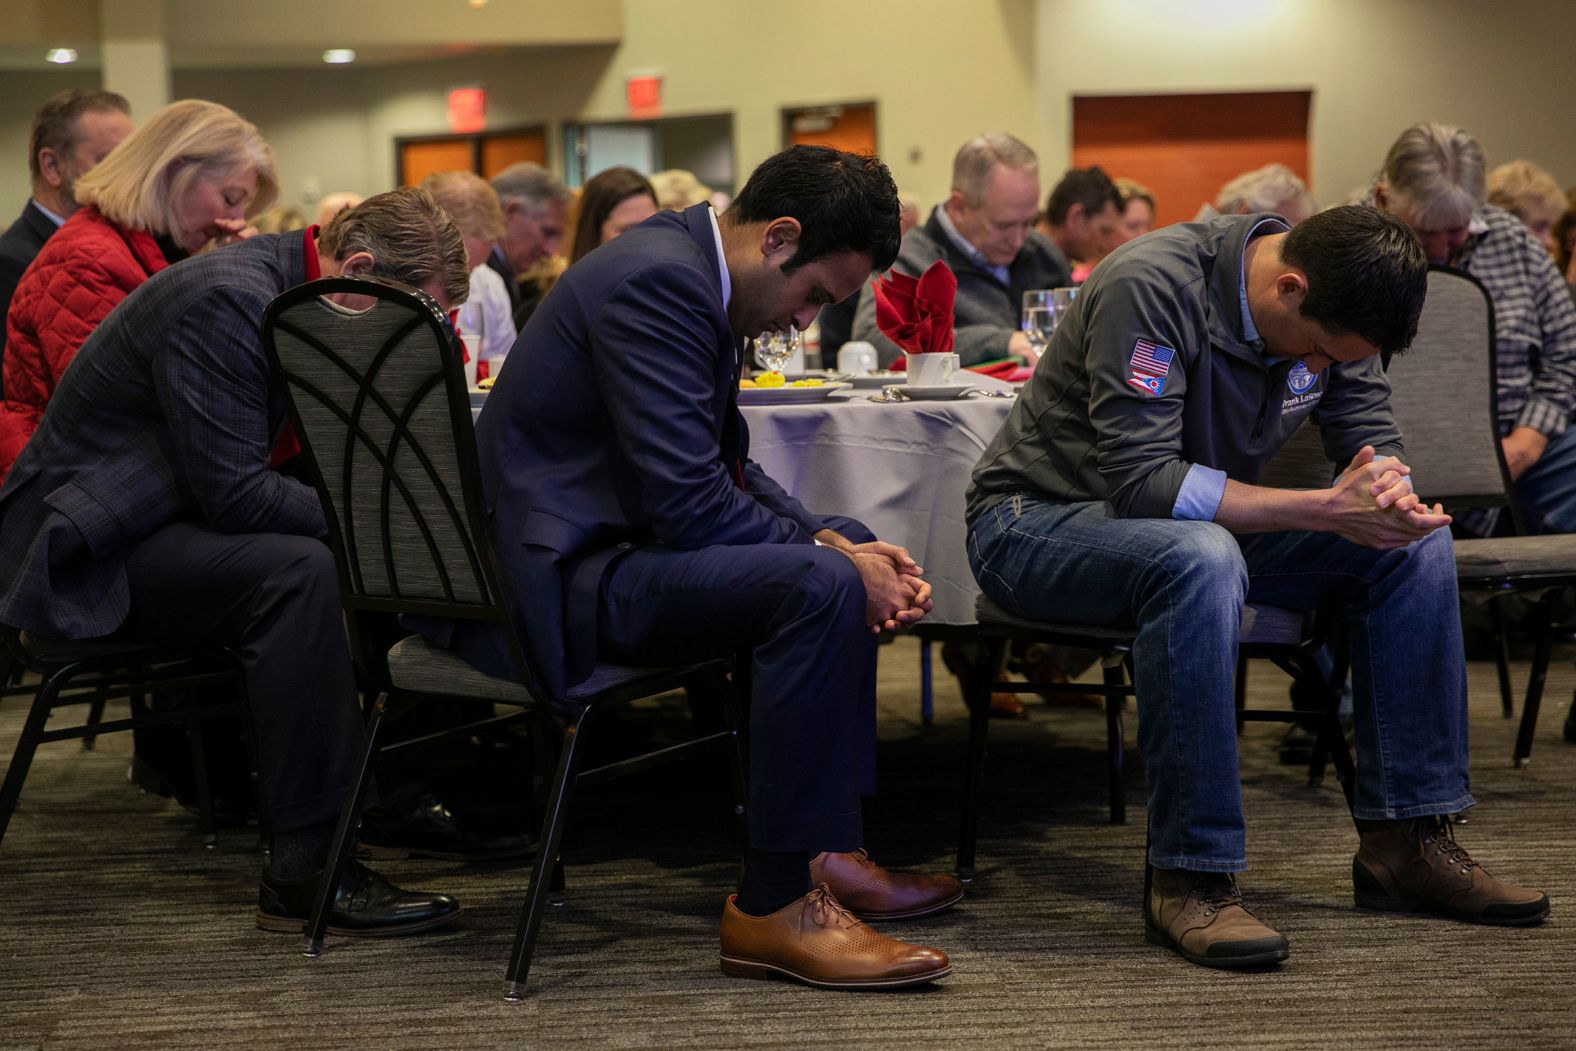 Ramaswamy bows his head in prayer while attending the Ohio Republican Pancake Breakfast in Cincinnati in March 2023. Ramaswamy is a practicing Hindu.